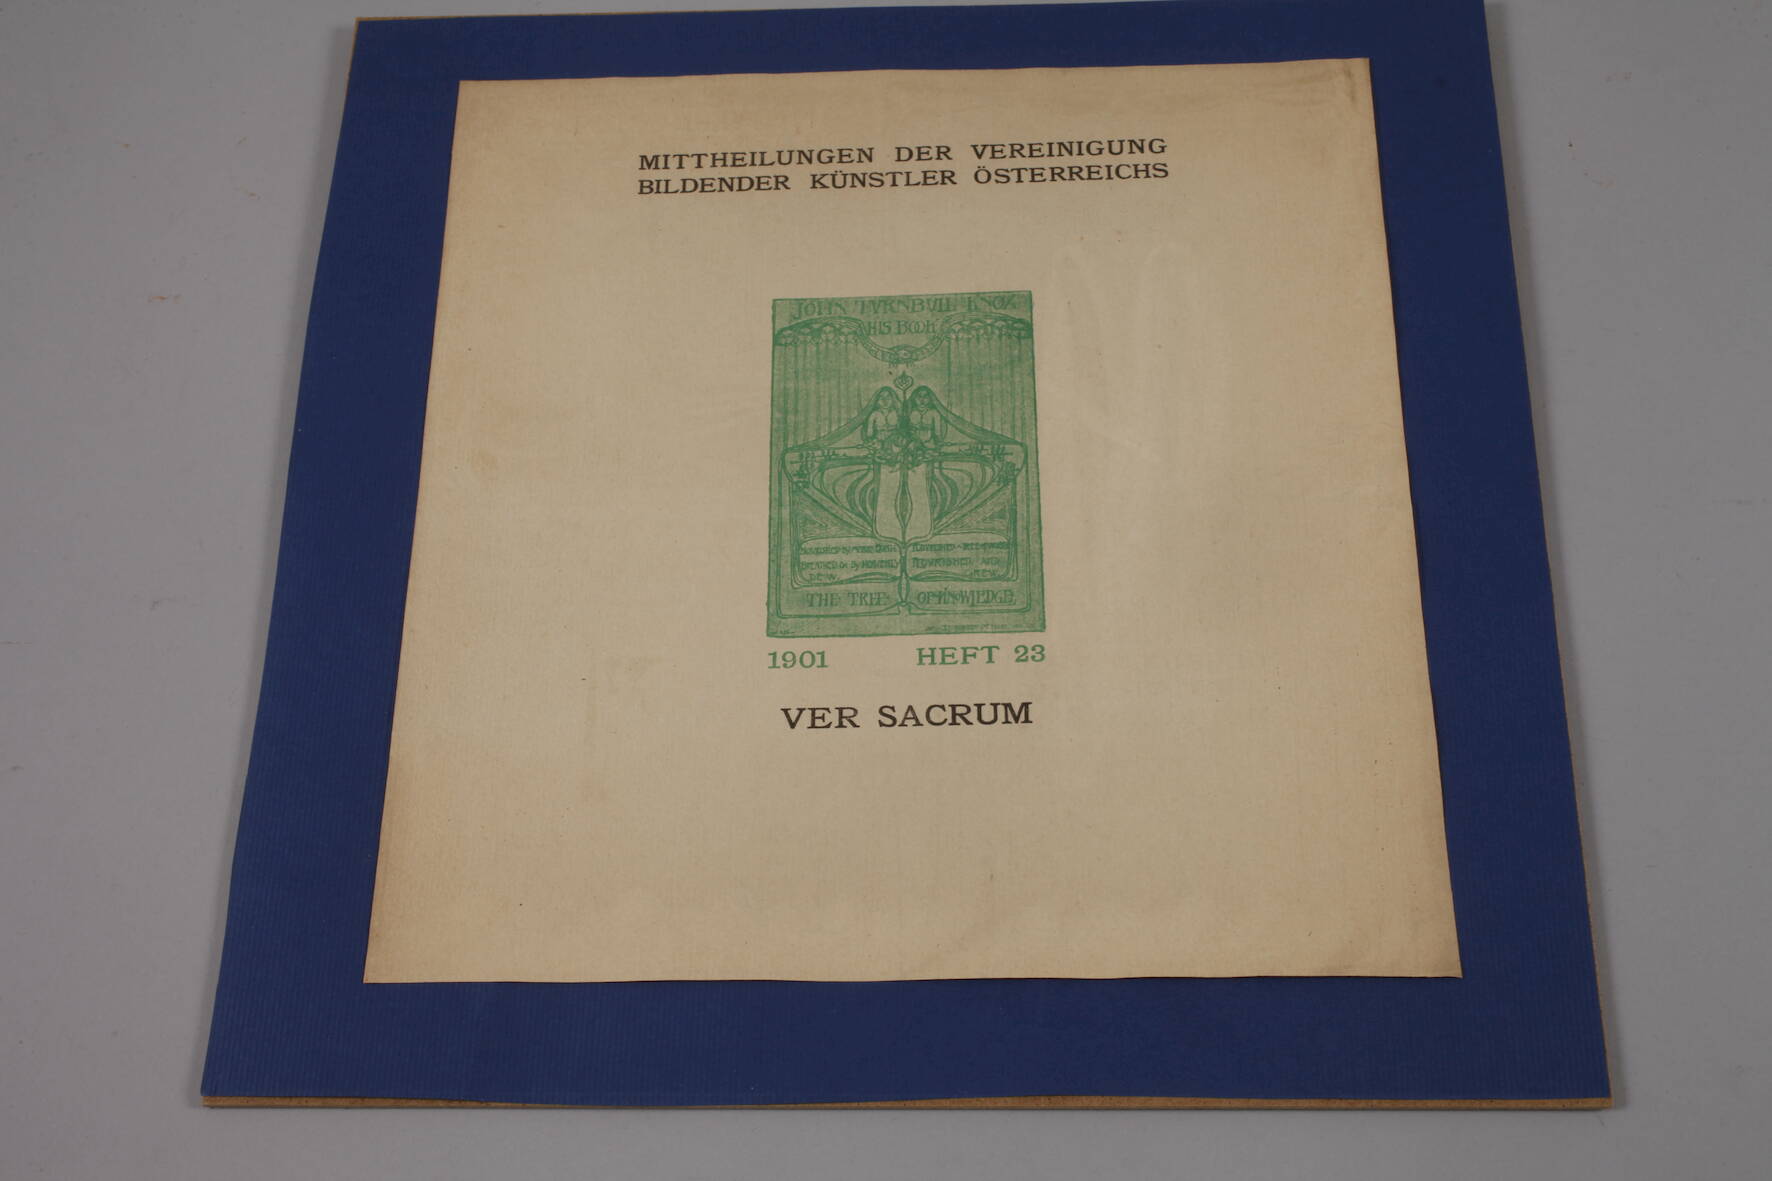 Title page "Ver Sacrum" - Image 2 of 4